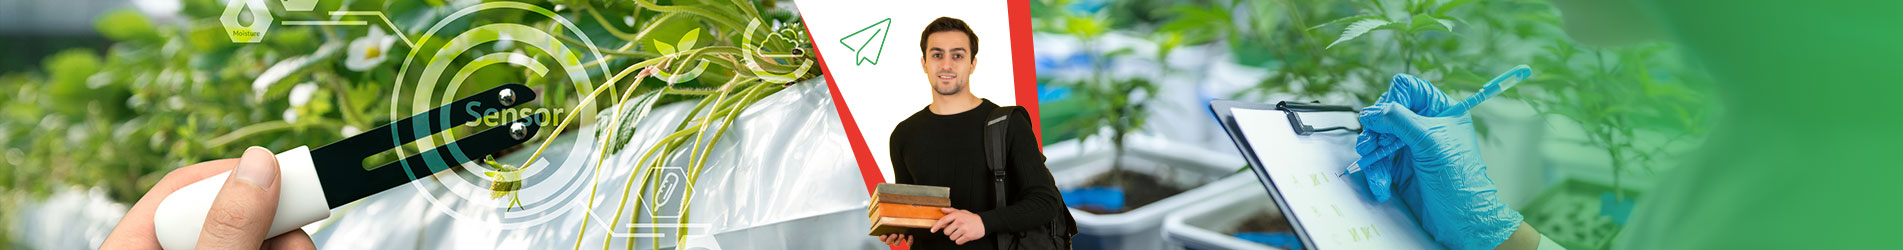 Study Agriculture Sciences in Abroad Banner